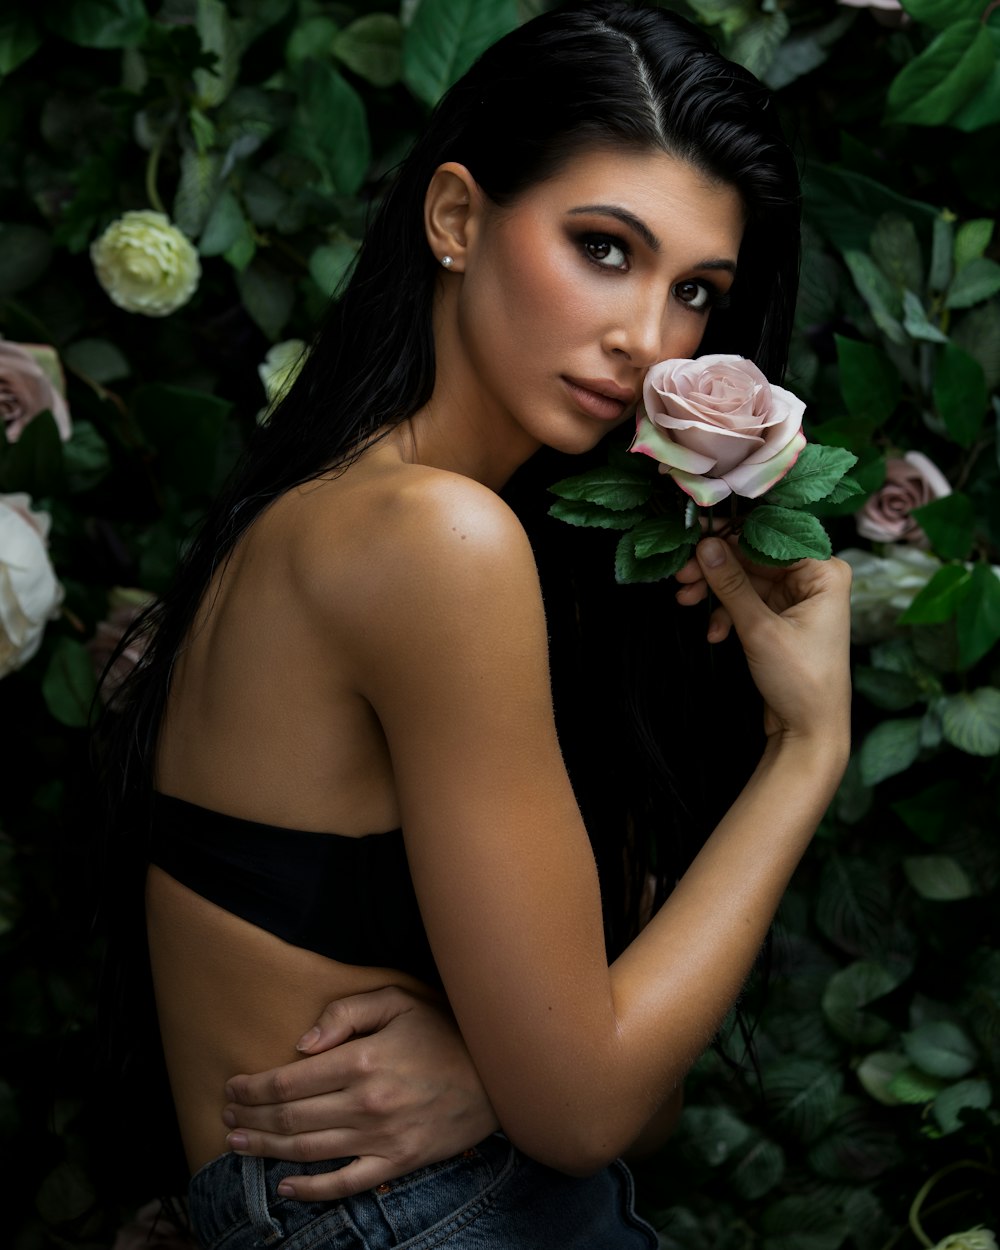 woman in black brassiere holding pink rose